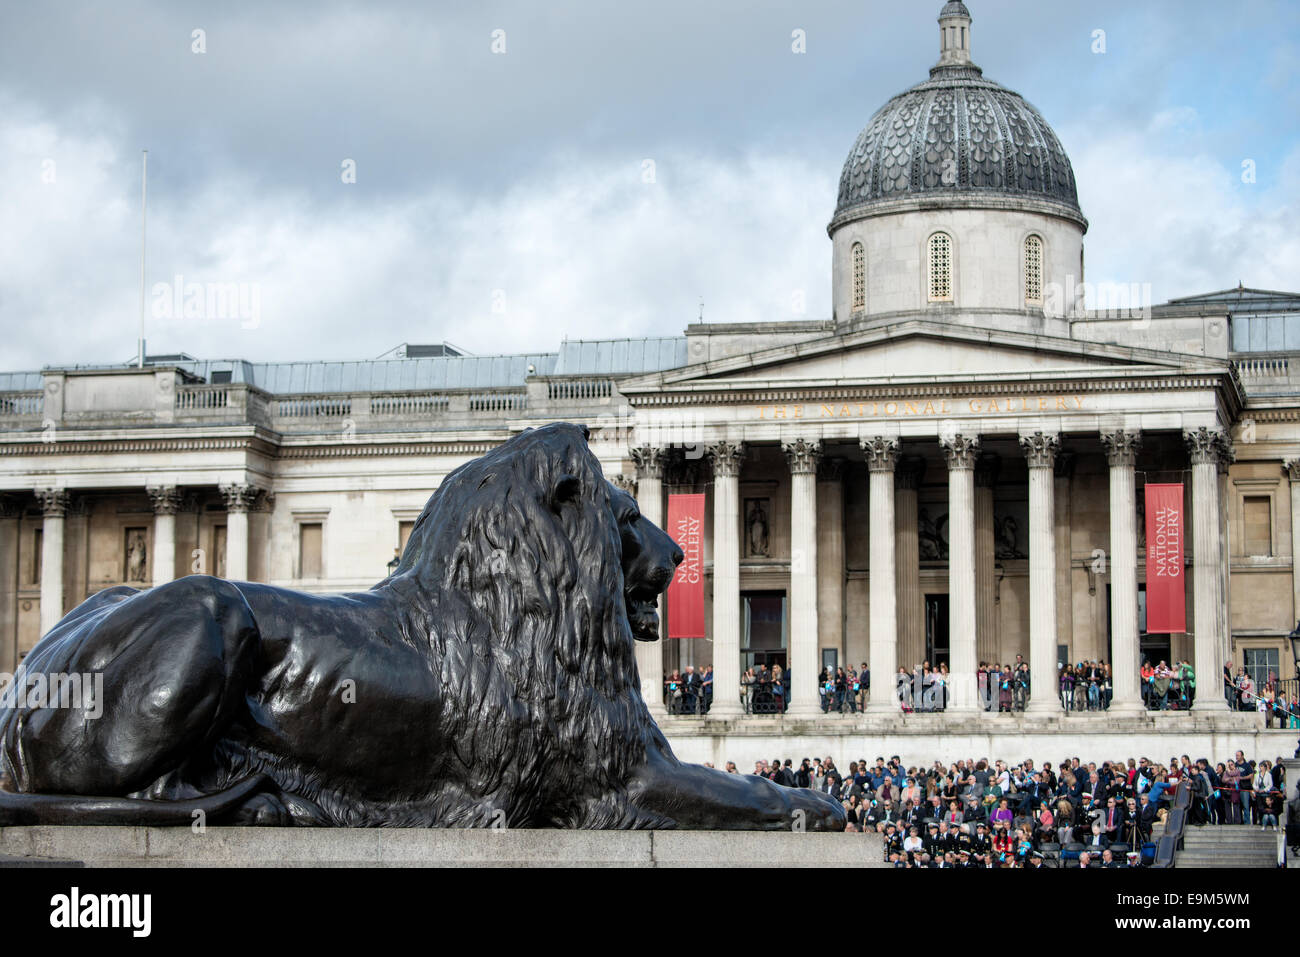 LONDON, UK - One of four large statues of lions that sit at the base of Nelson's Column in Trafalgar Square in central London. In the background is the British National Gallery. Built to commemorate Admiral Horatio Nelson's victory at the Battle of Trafalgar, the square serves as both a historic site and a central hub for cultural and community events. Stock Photo